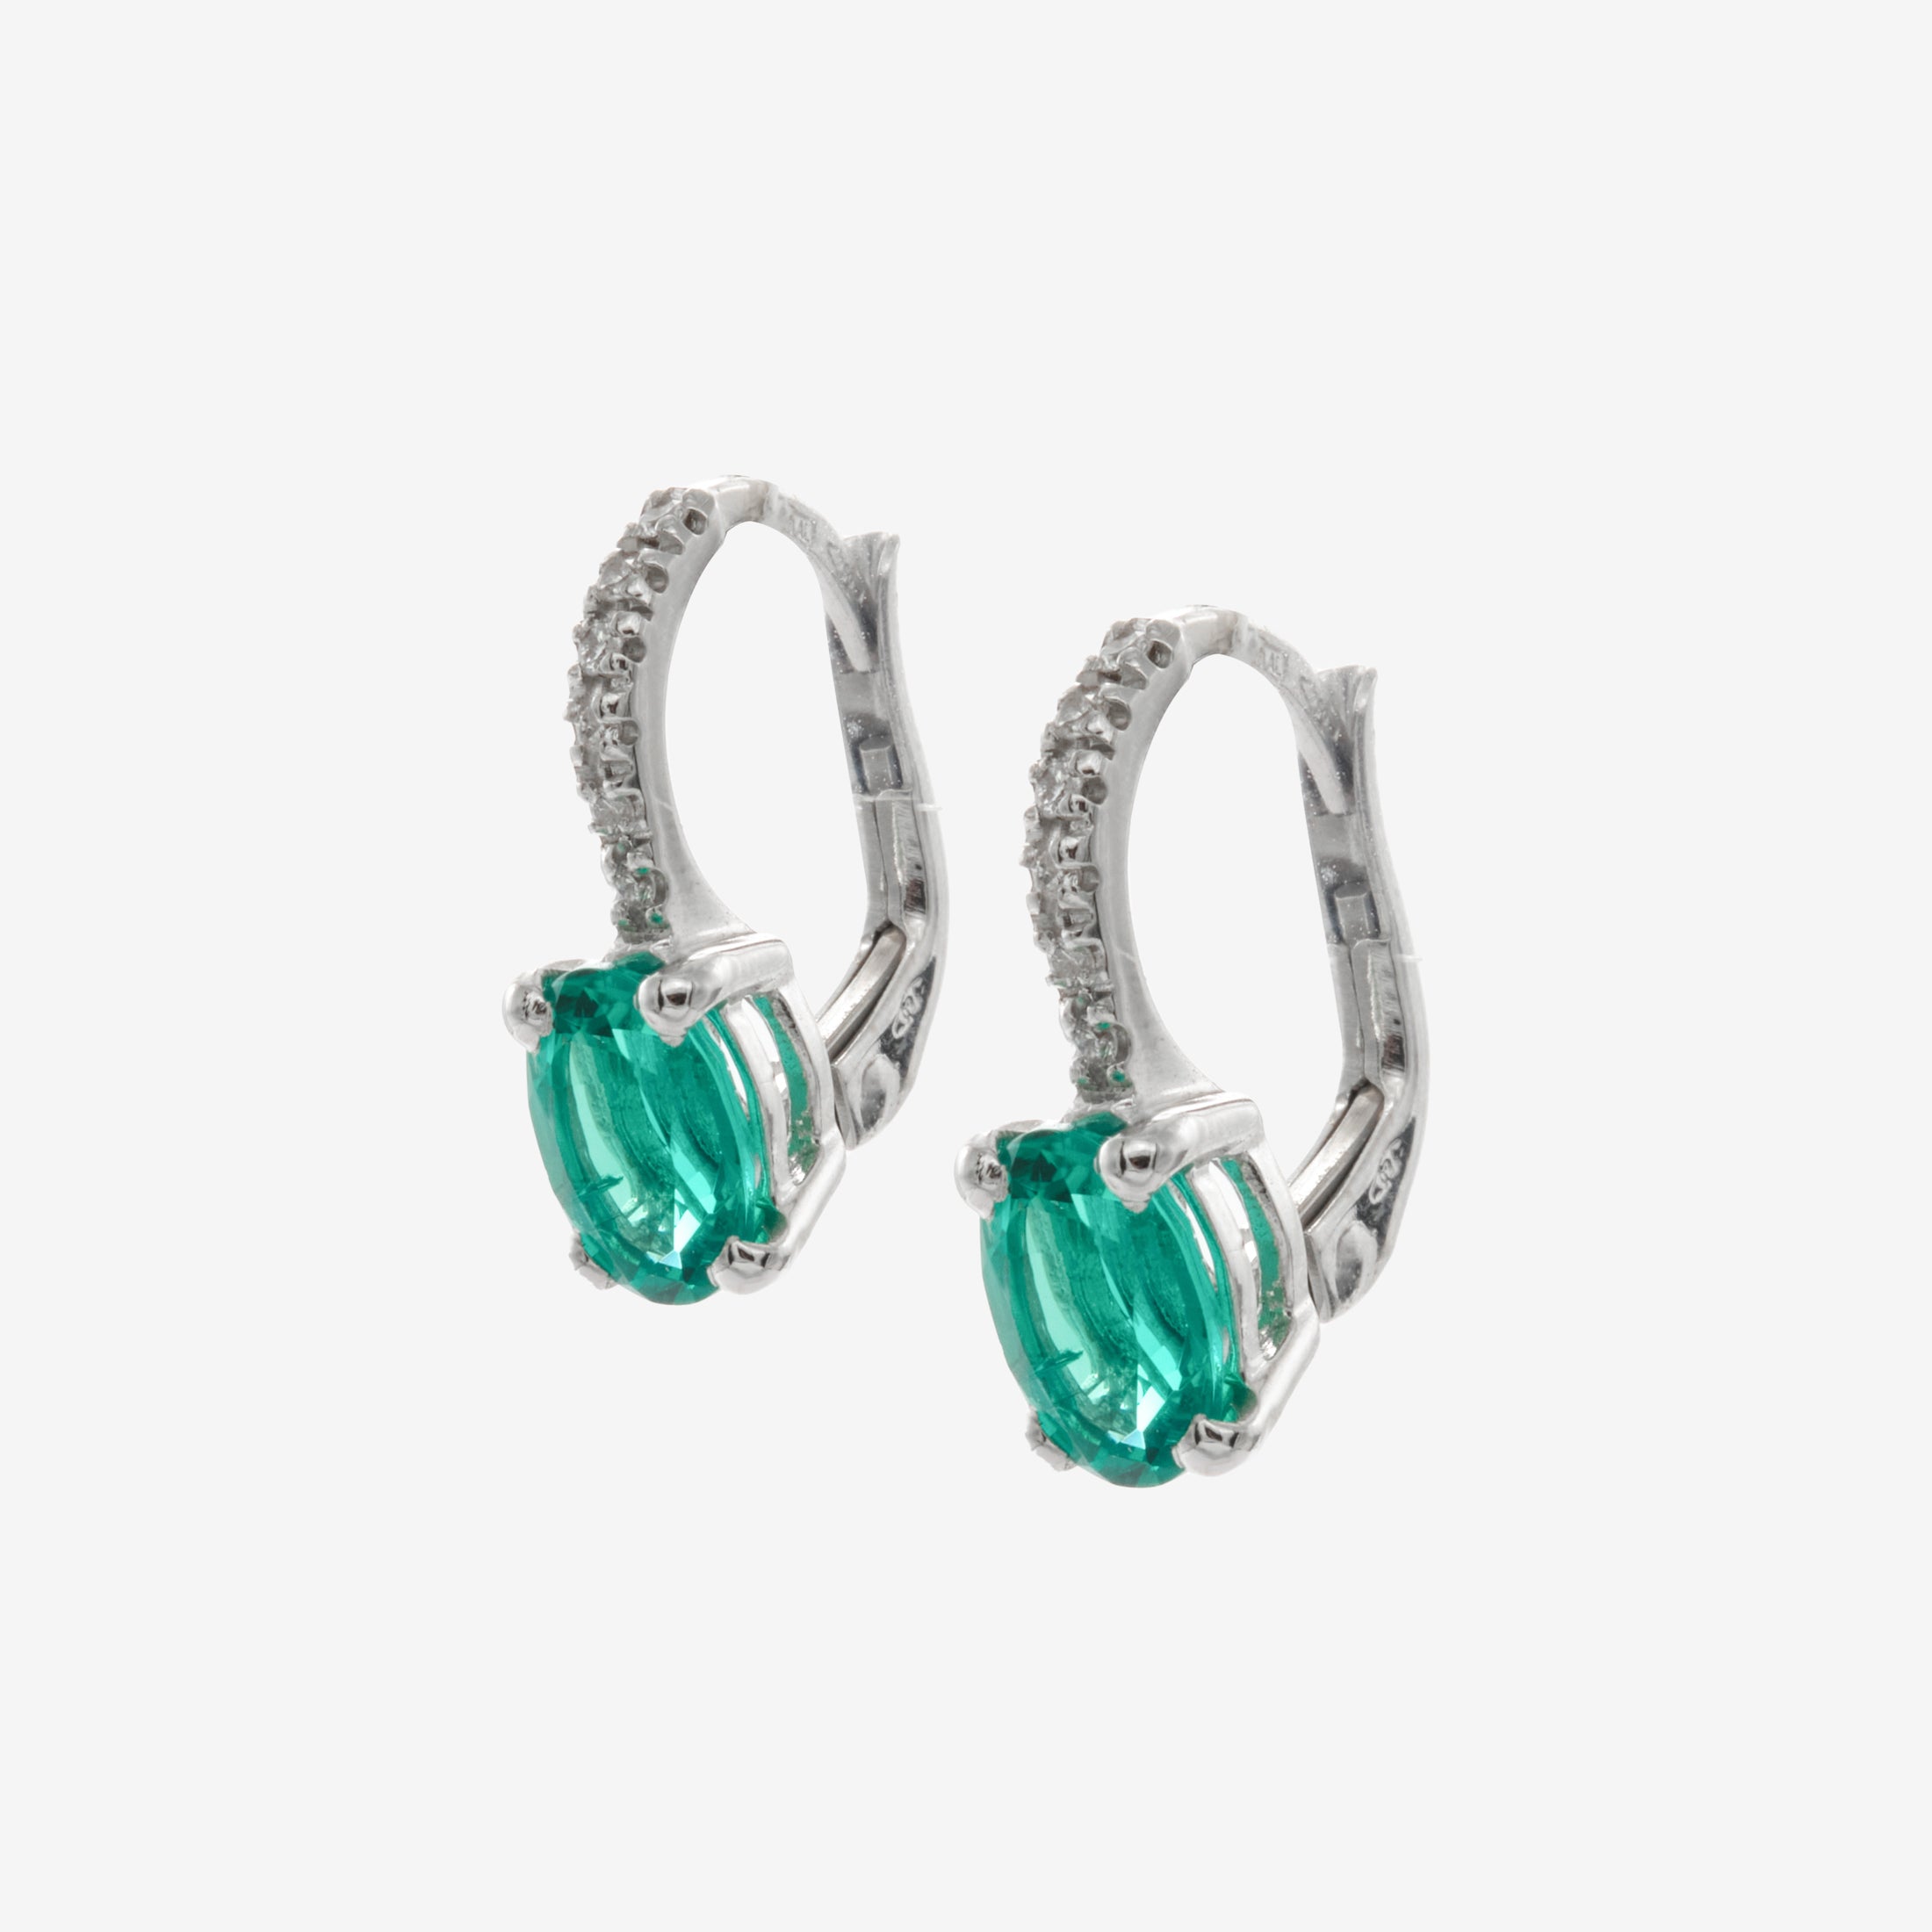 Fleur earrings with emeralds and diamonds